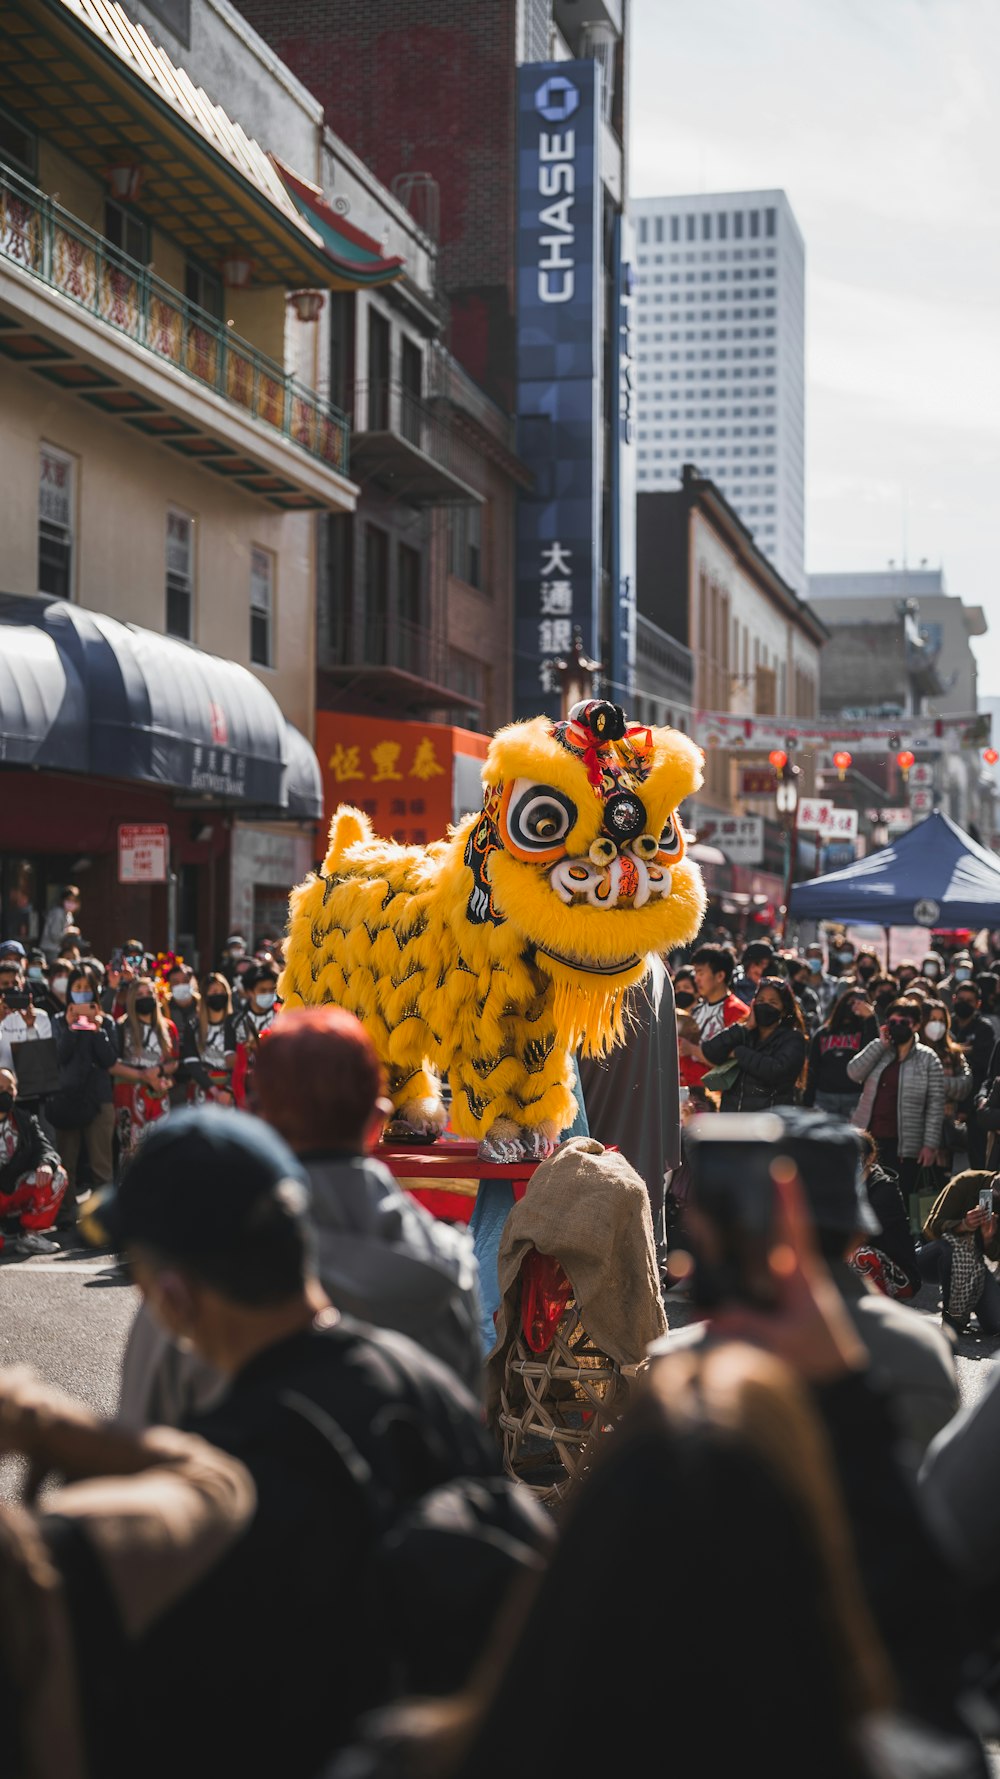 a parade with a large yellow lion float in the middle of the street